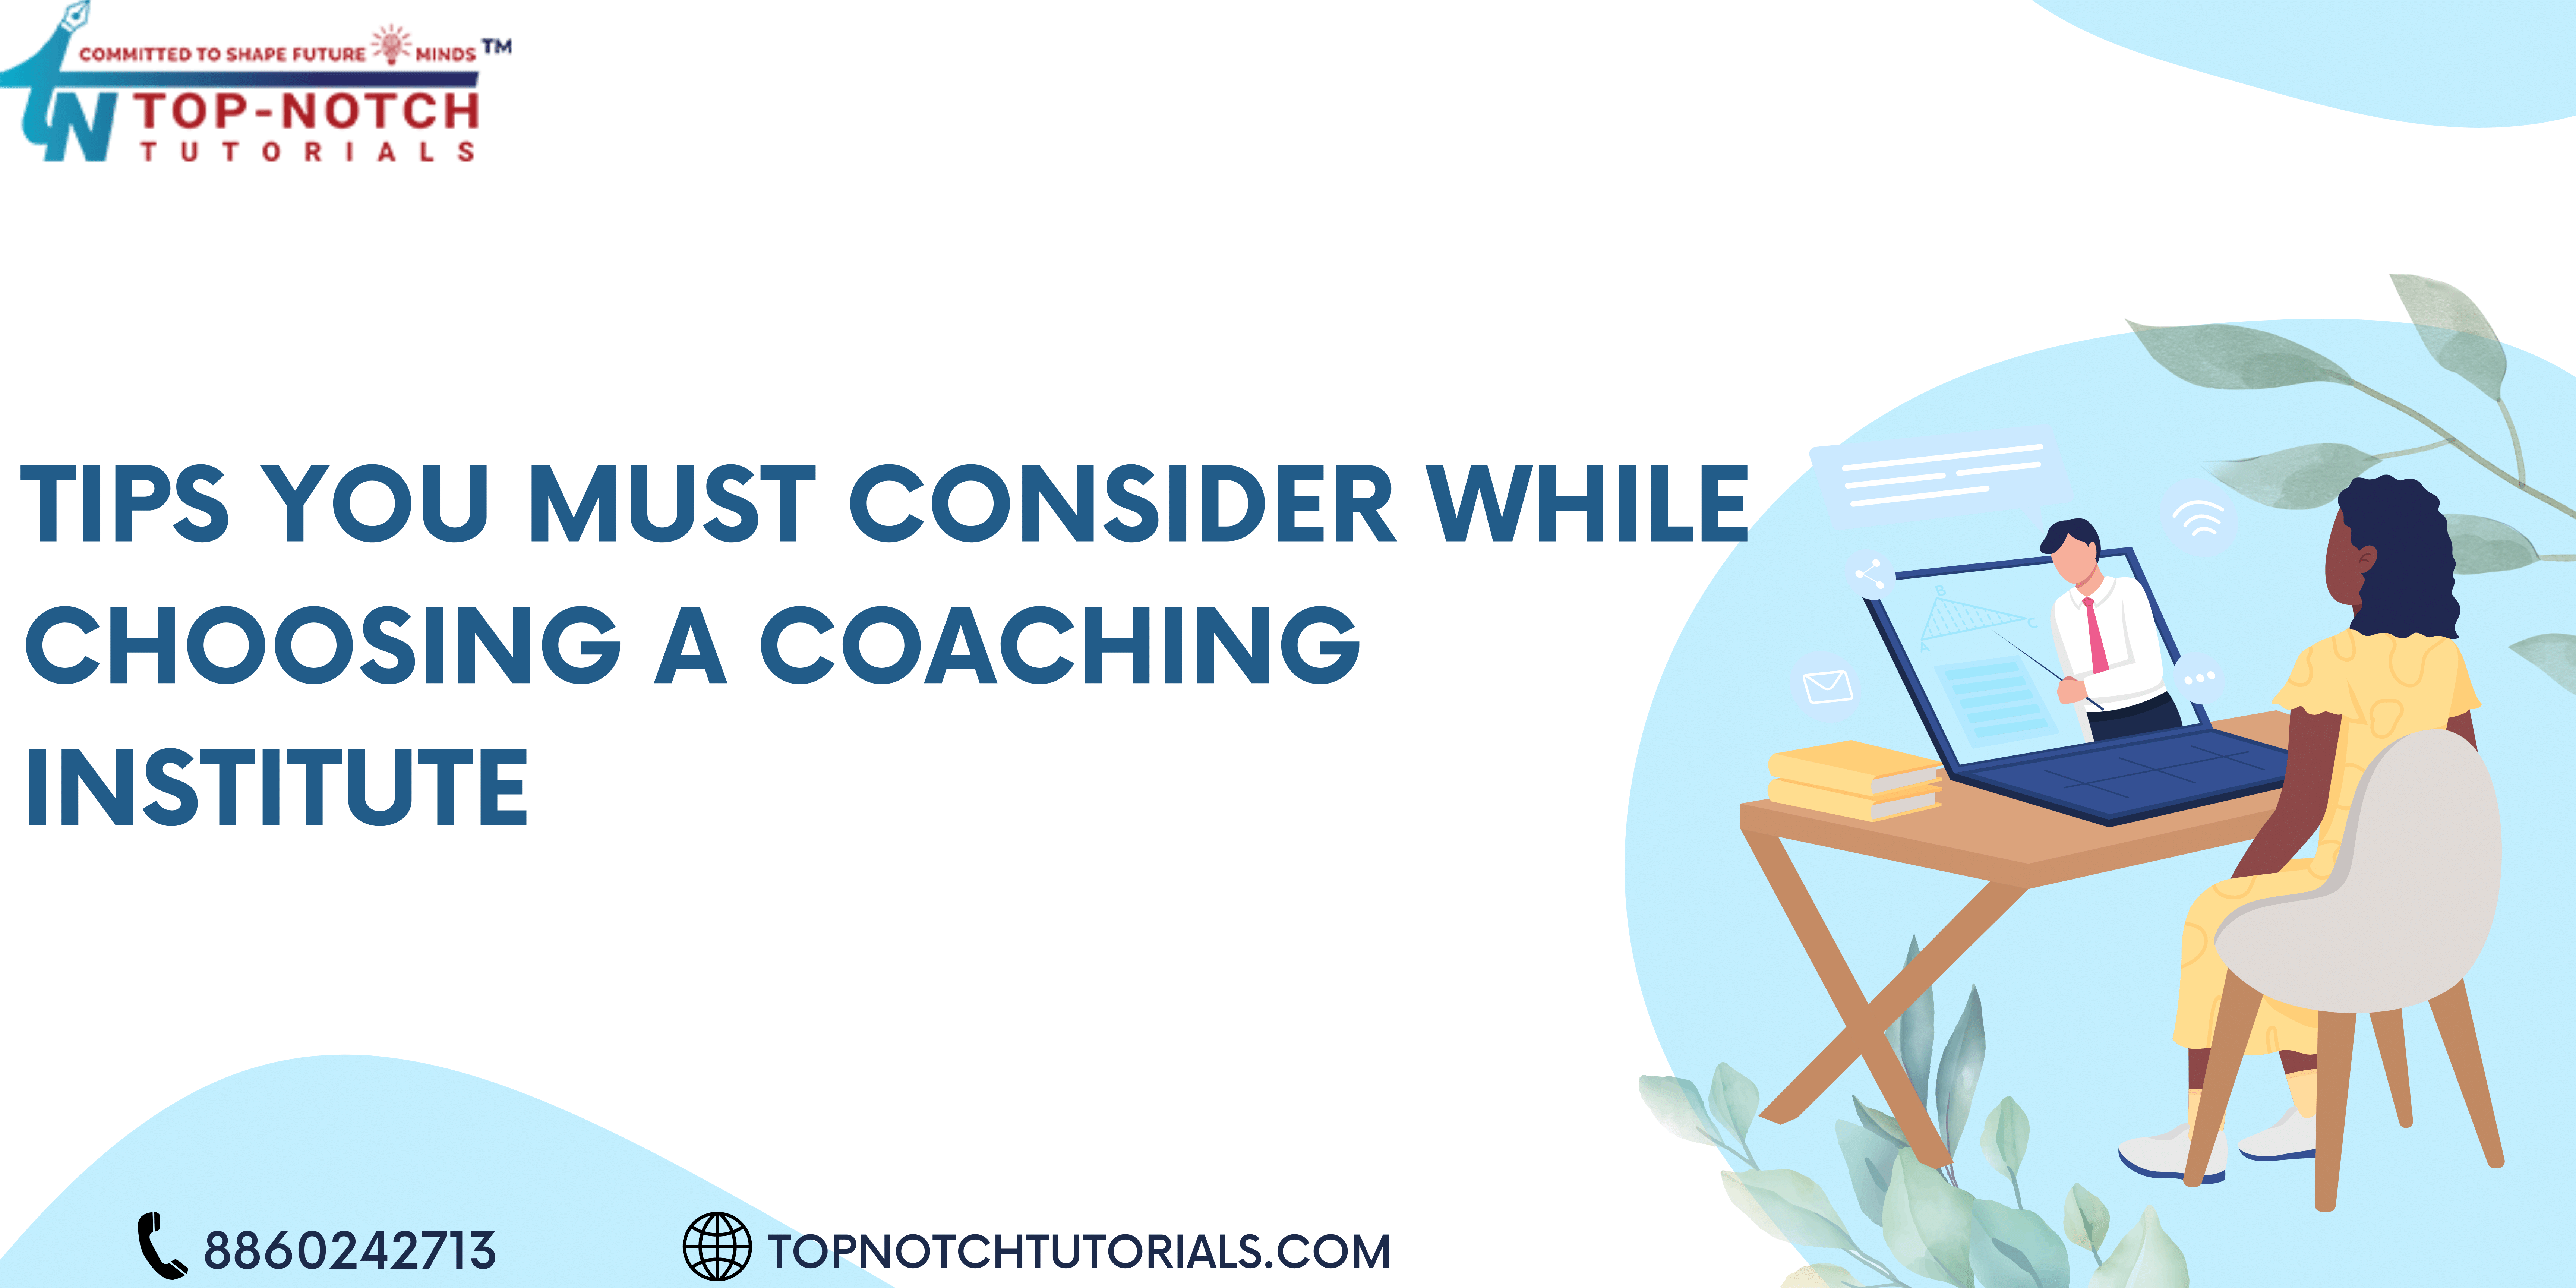 Tips You Must Consider While Choosing a Coaching Institute